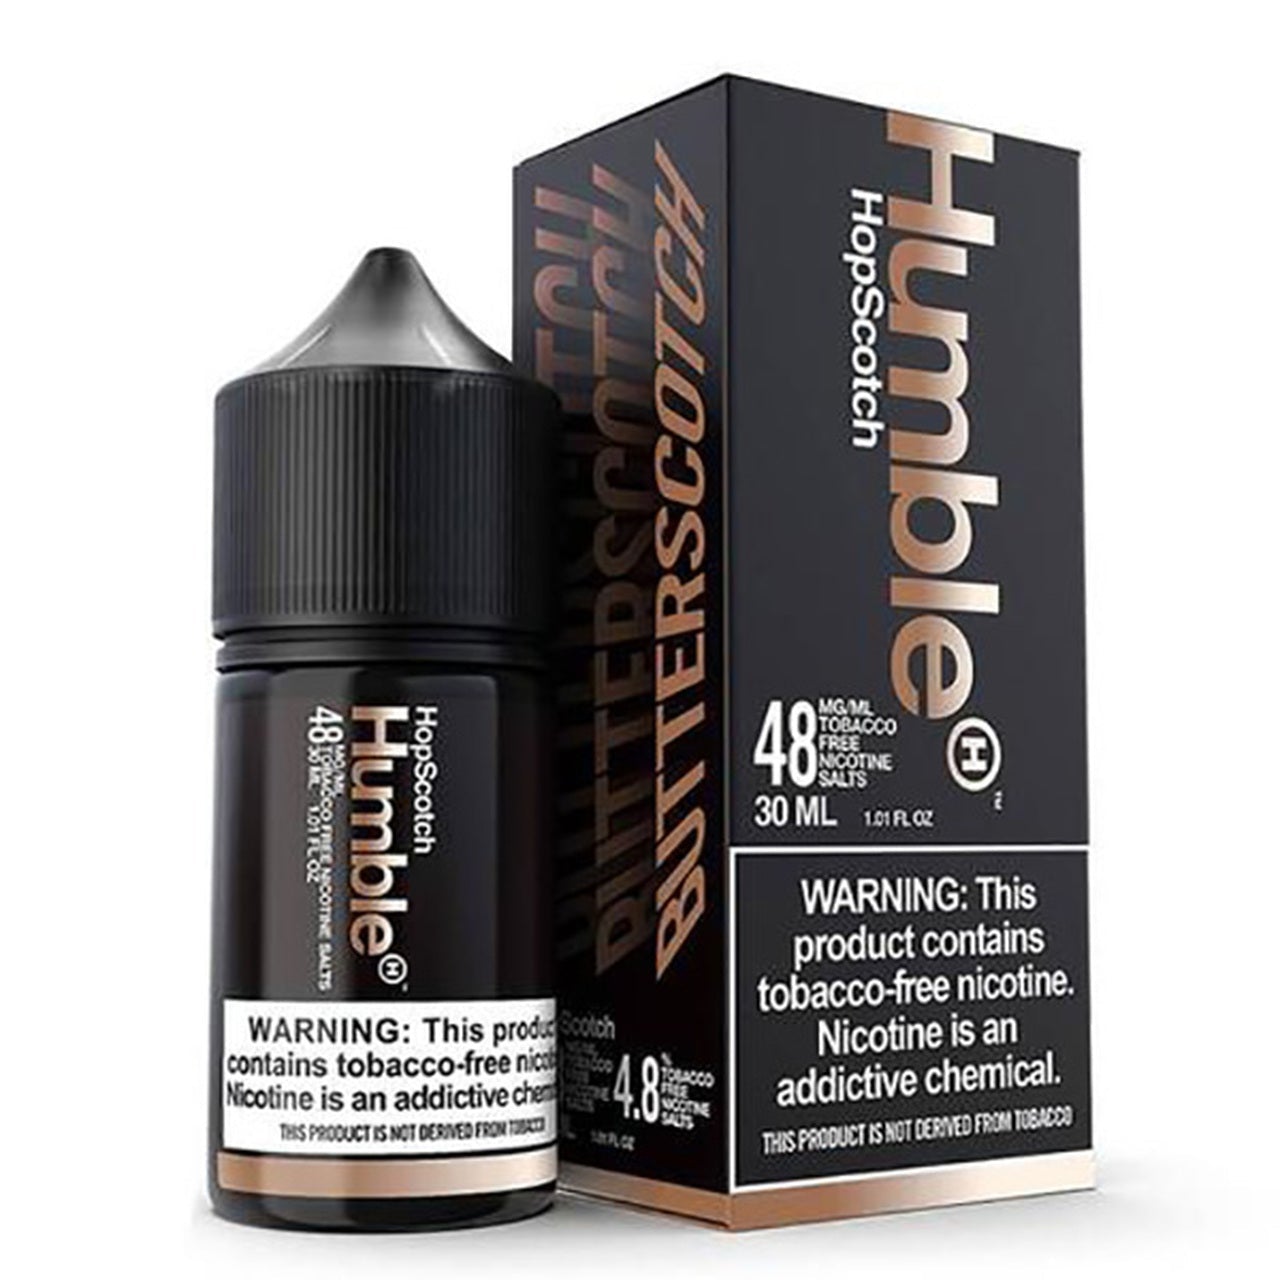 Hop Scotch By Humble Salts Tobacco-Free Nicotine Series 30mL with Packaging